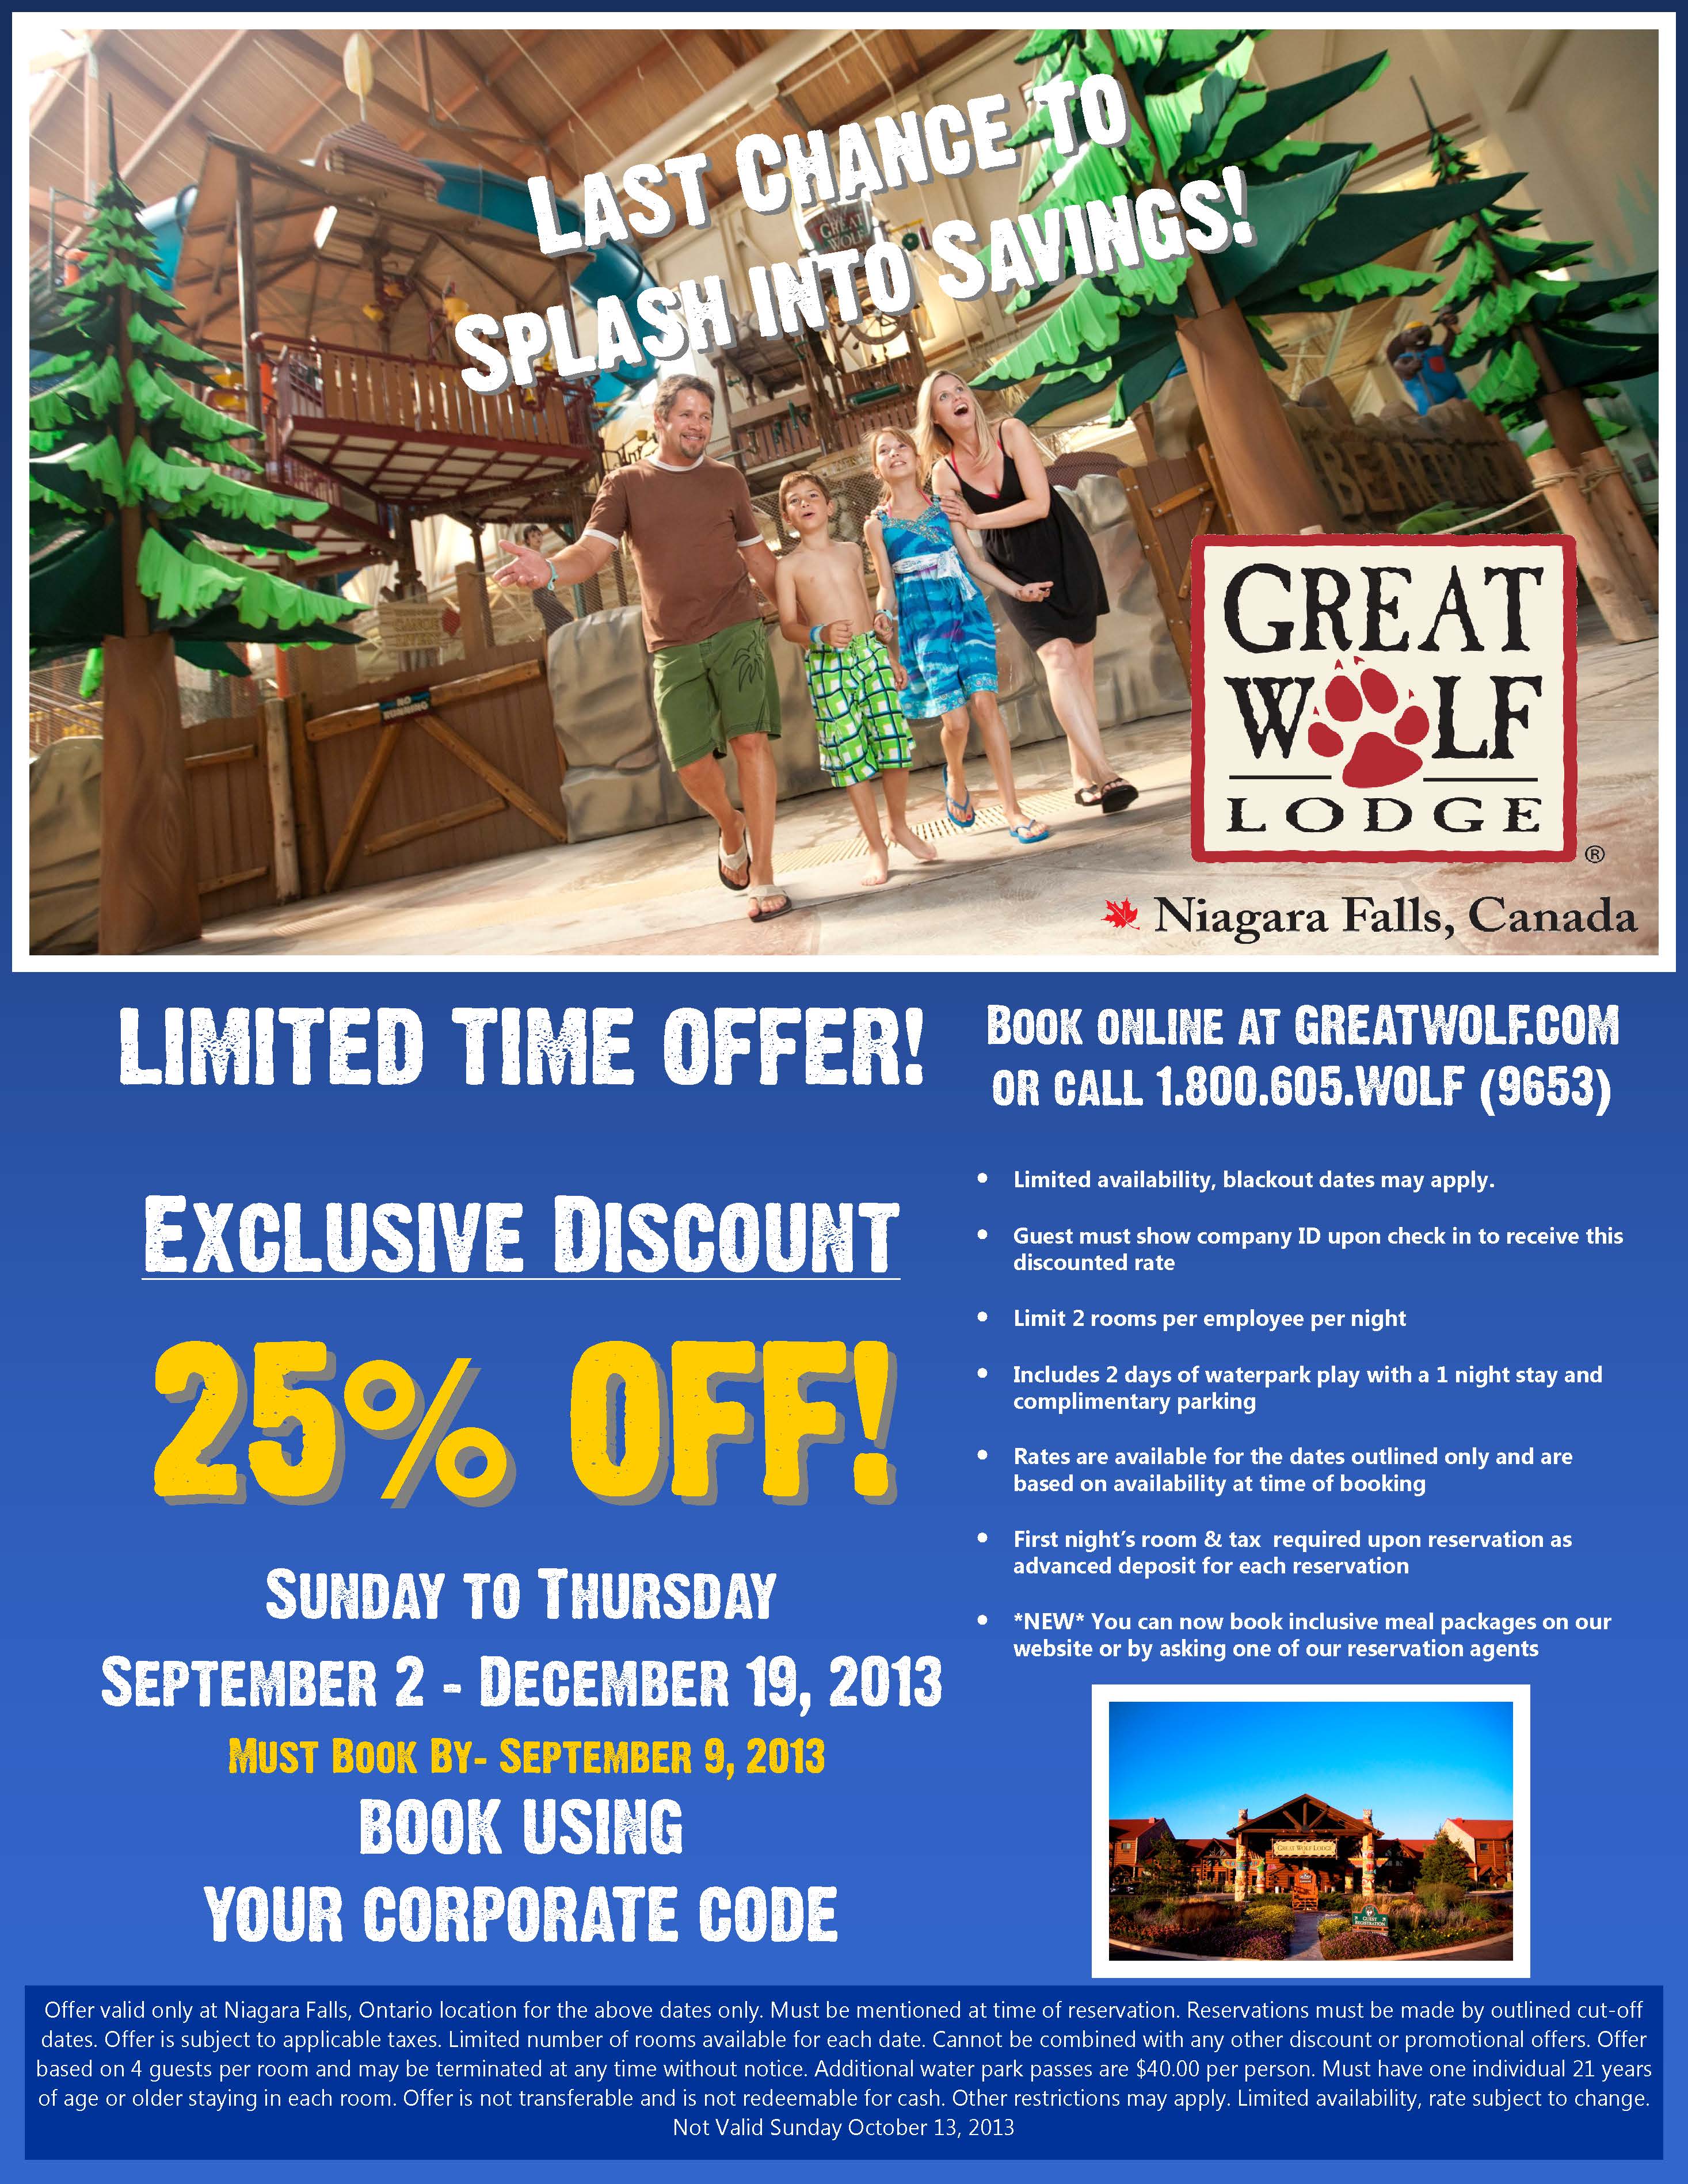 Planning Your Trip to Great Wolf Lodge Don’t Miss These Things